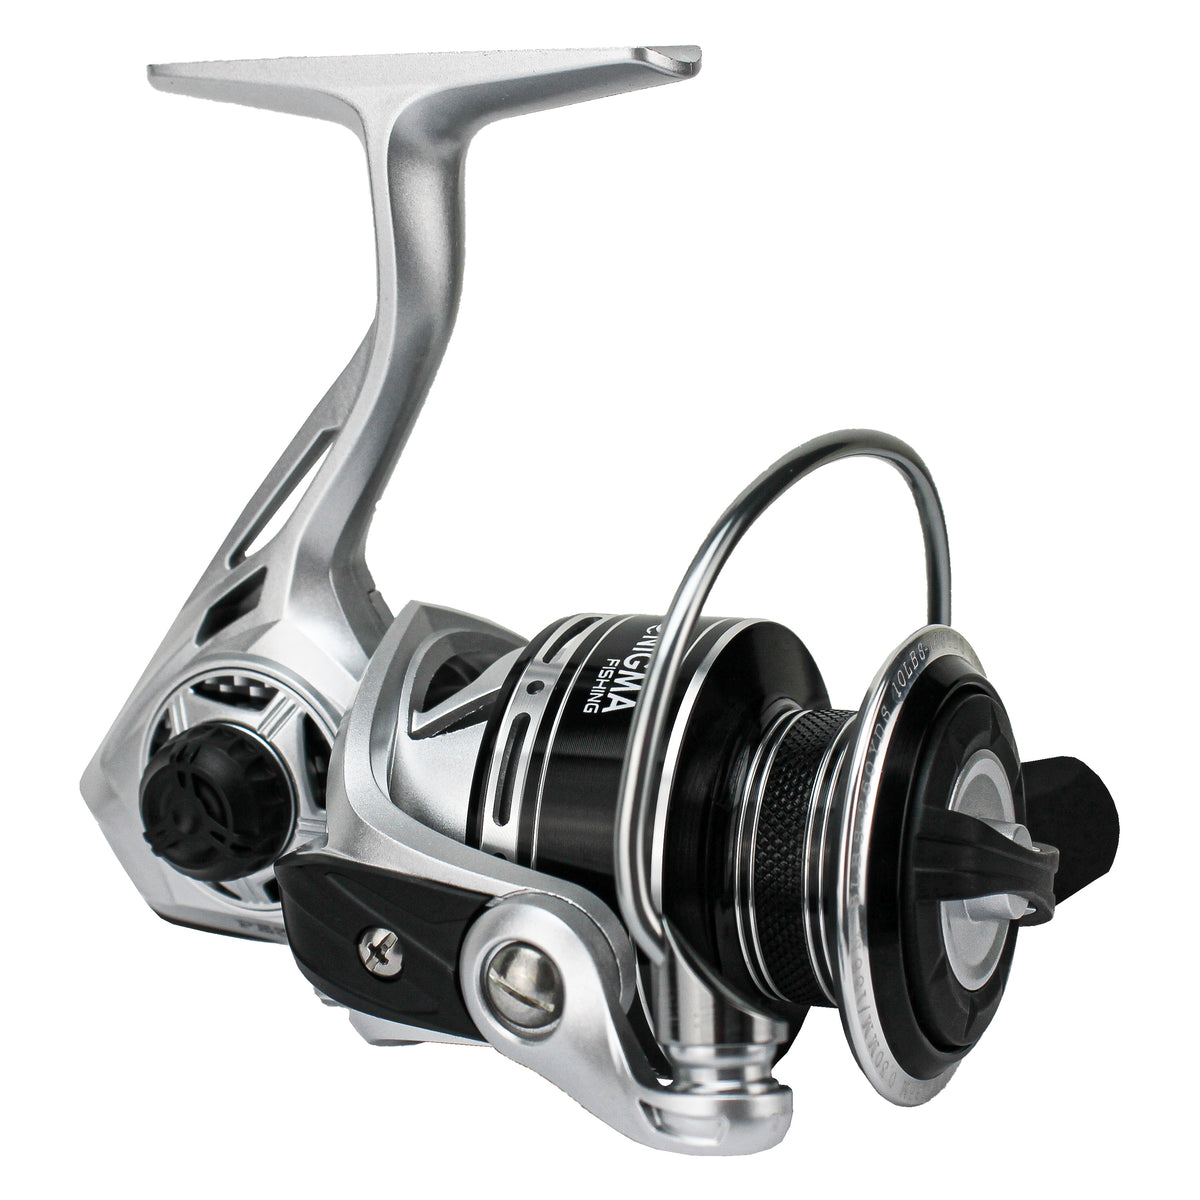 Ashconfish Spinning Fishing Reel, Graphite Body, 7+1 Stainless Steel BB,  5.0:1 Gear Ratio, Lightweight Spinning Reel for Freshwater Saltwater  Fishing